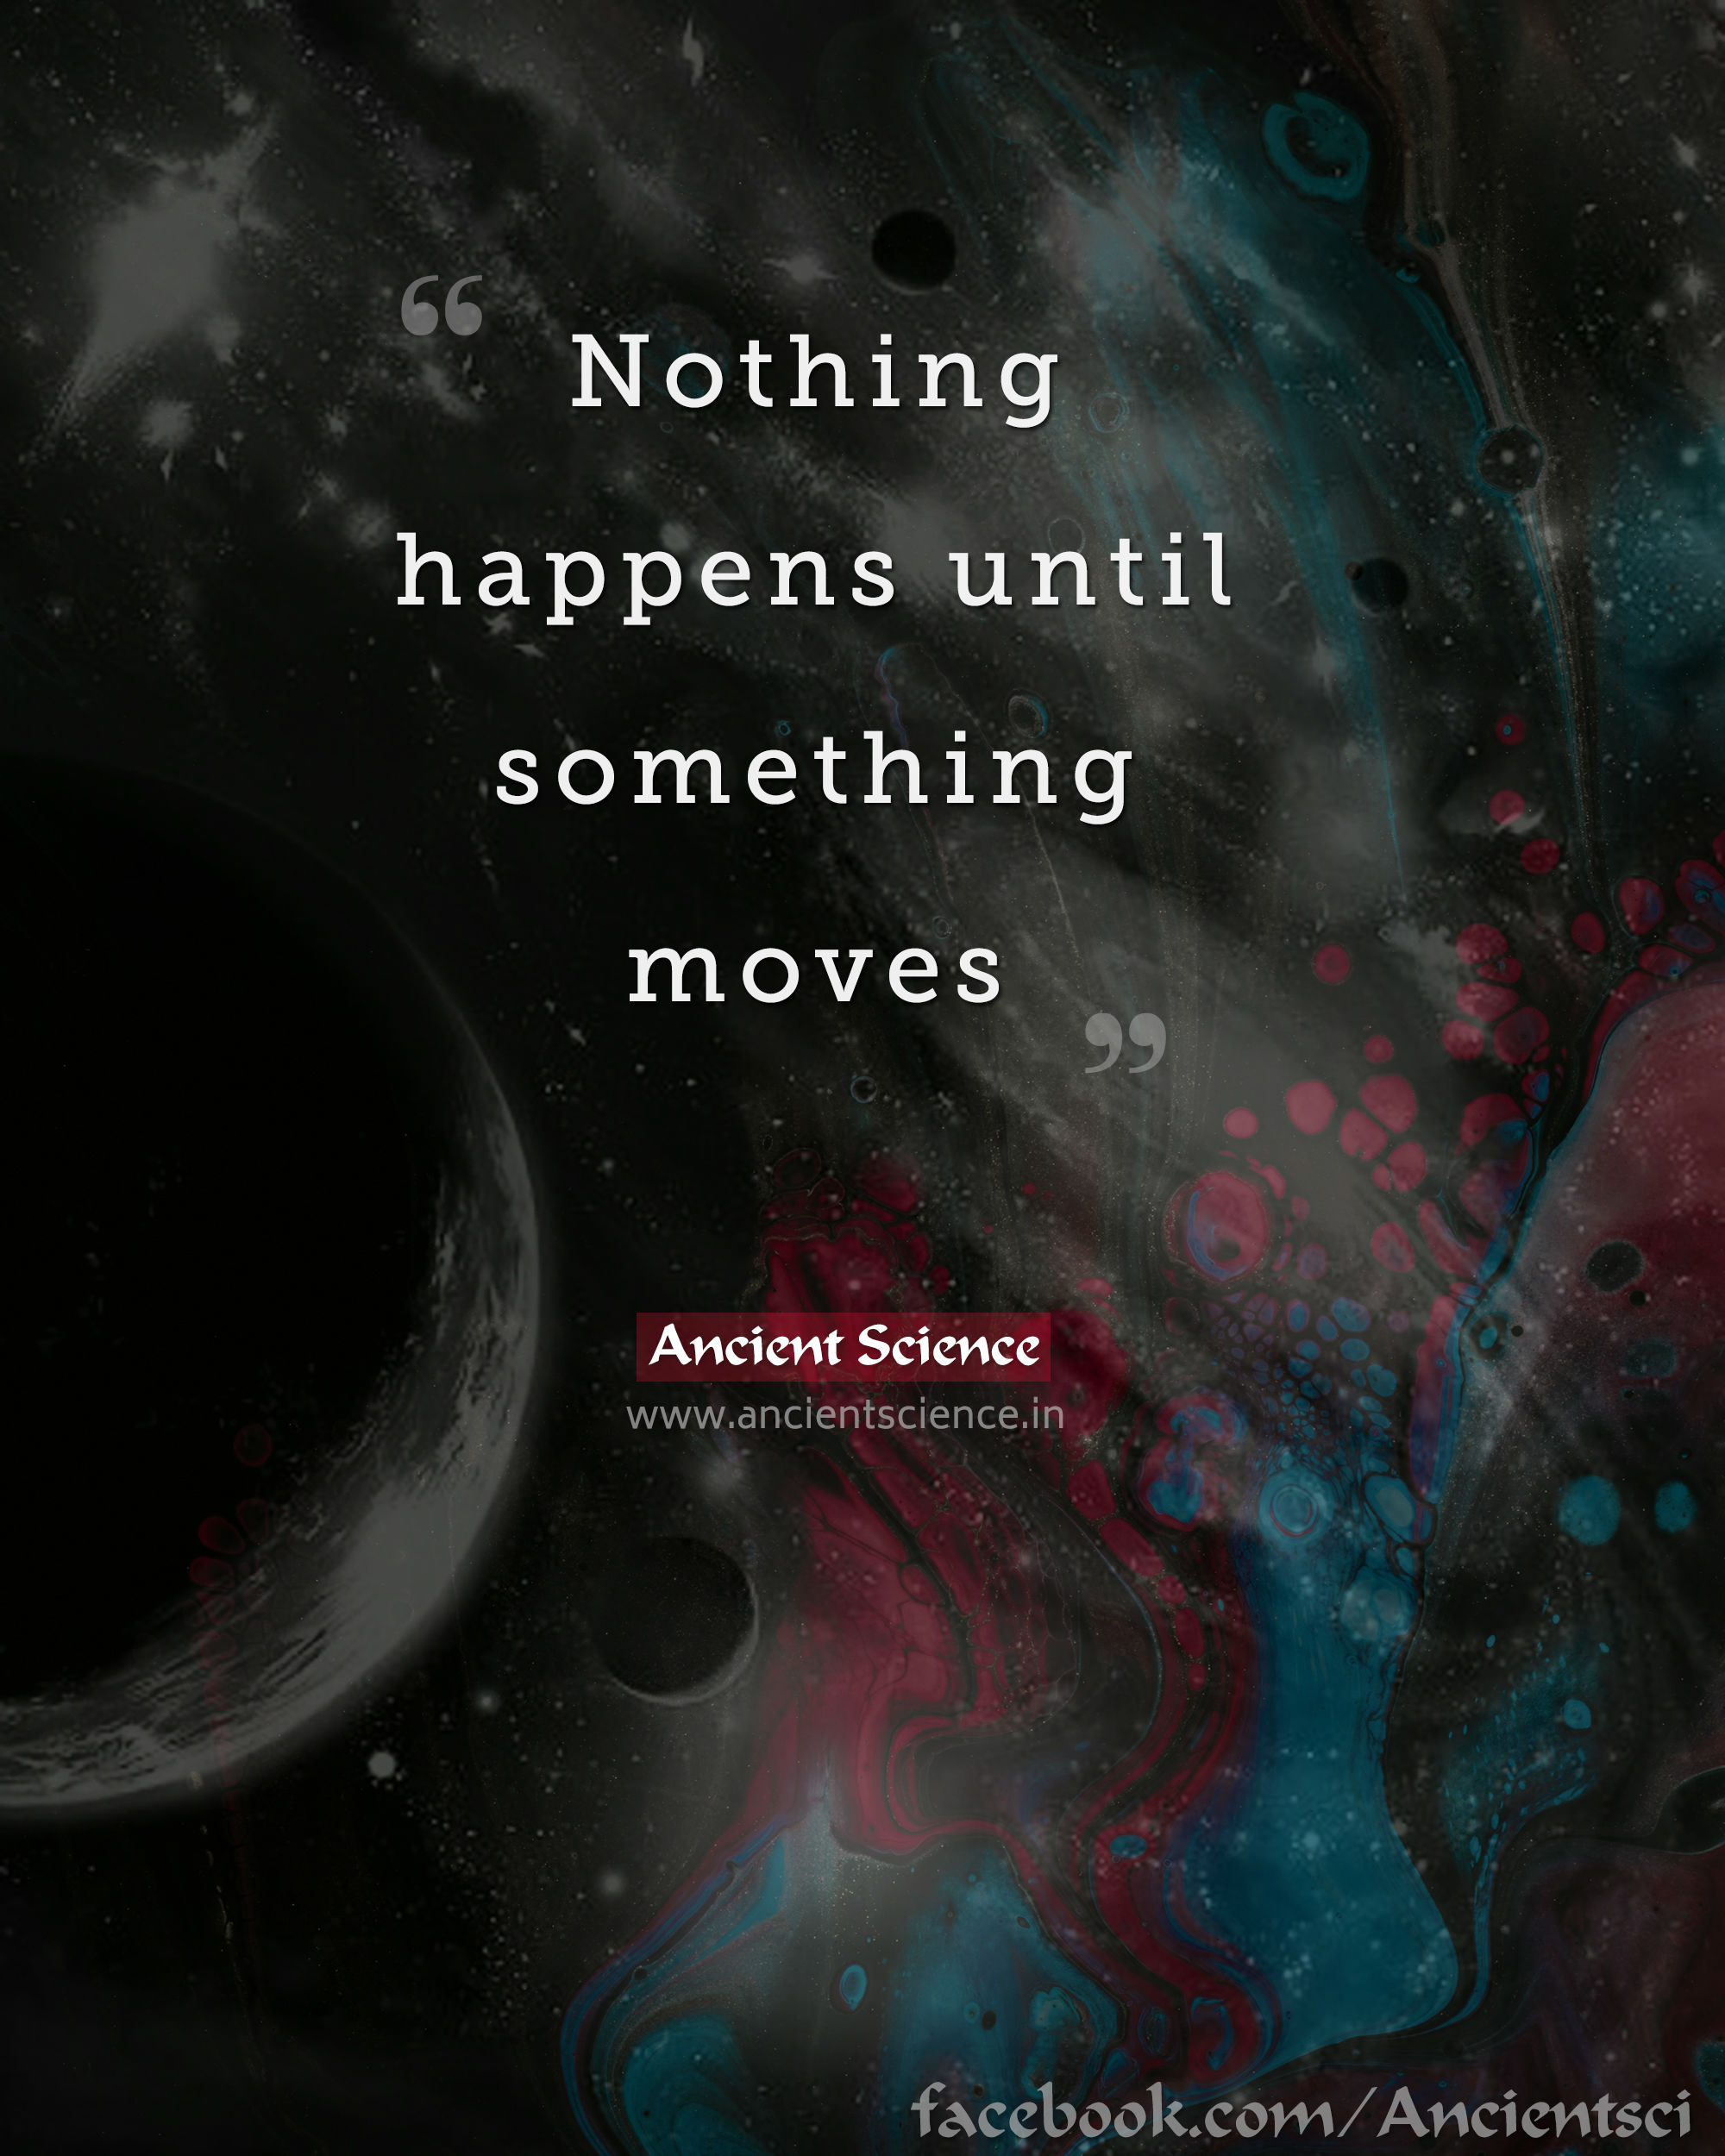 Nothing happens until something moves